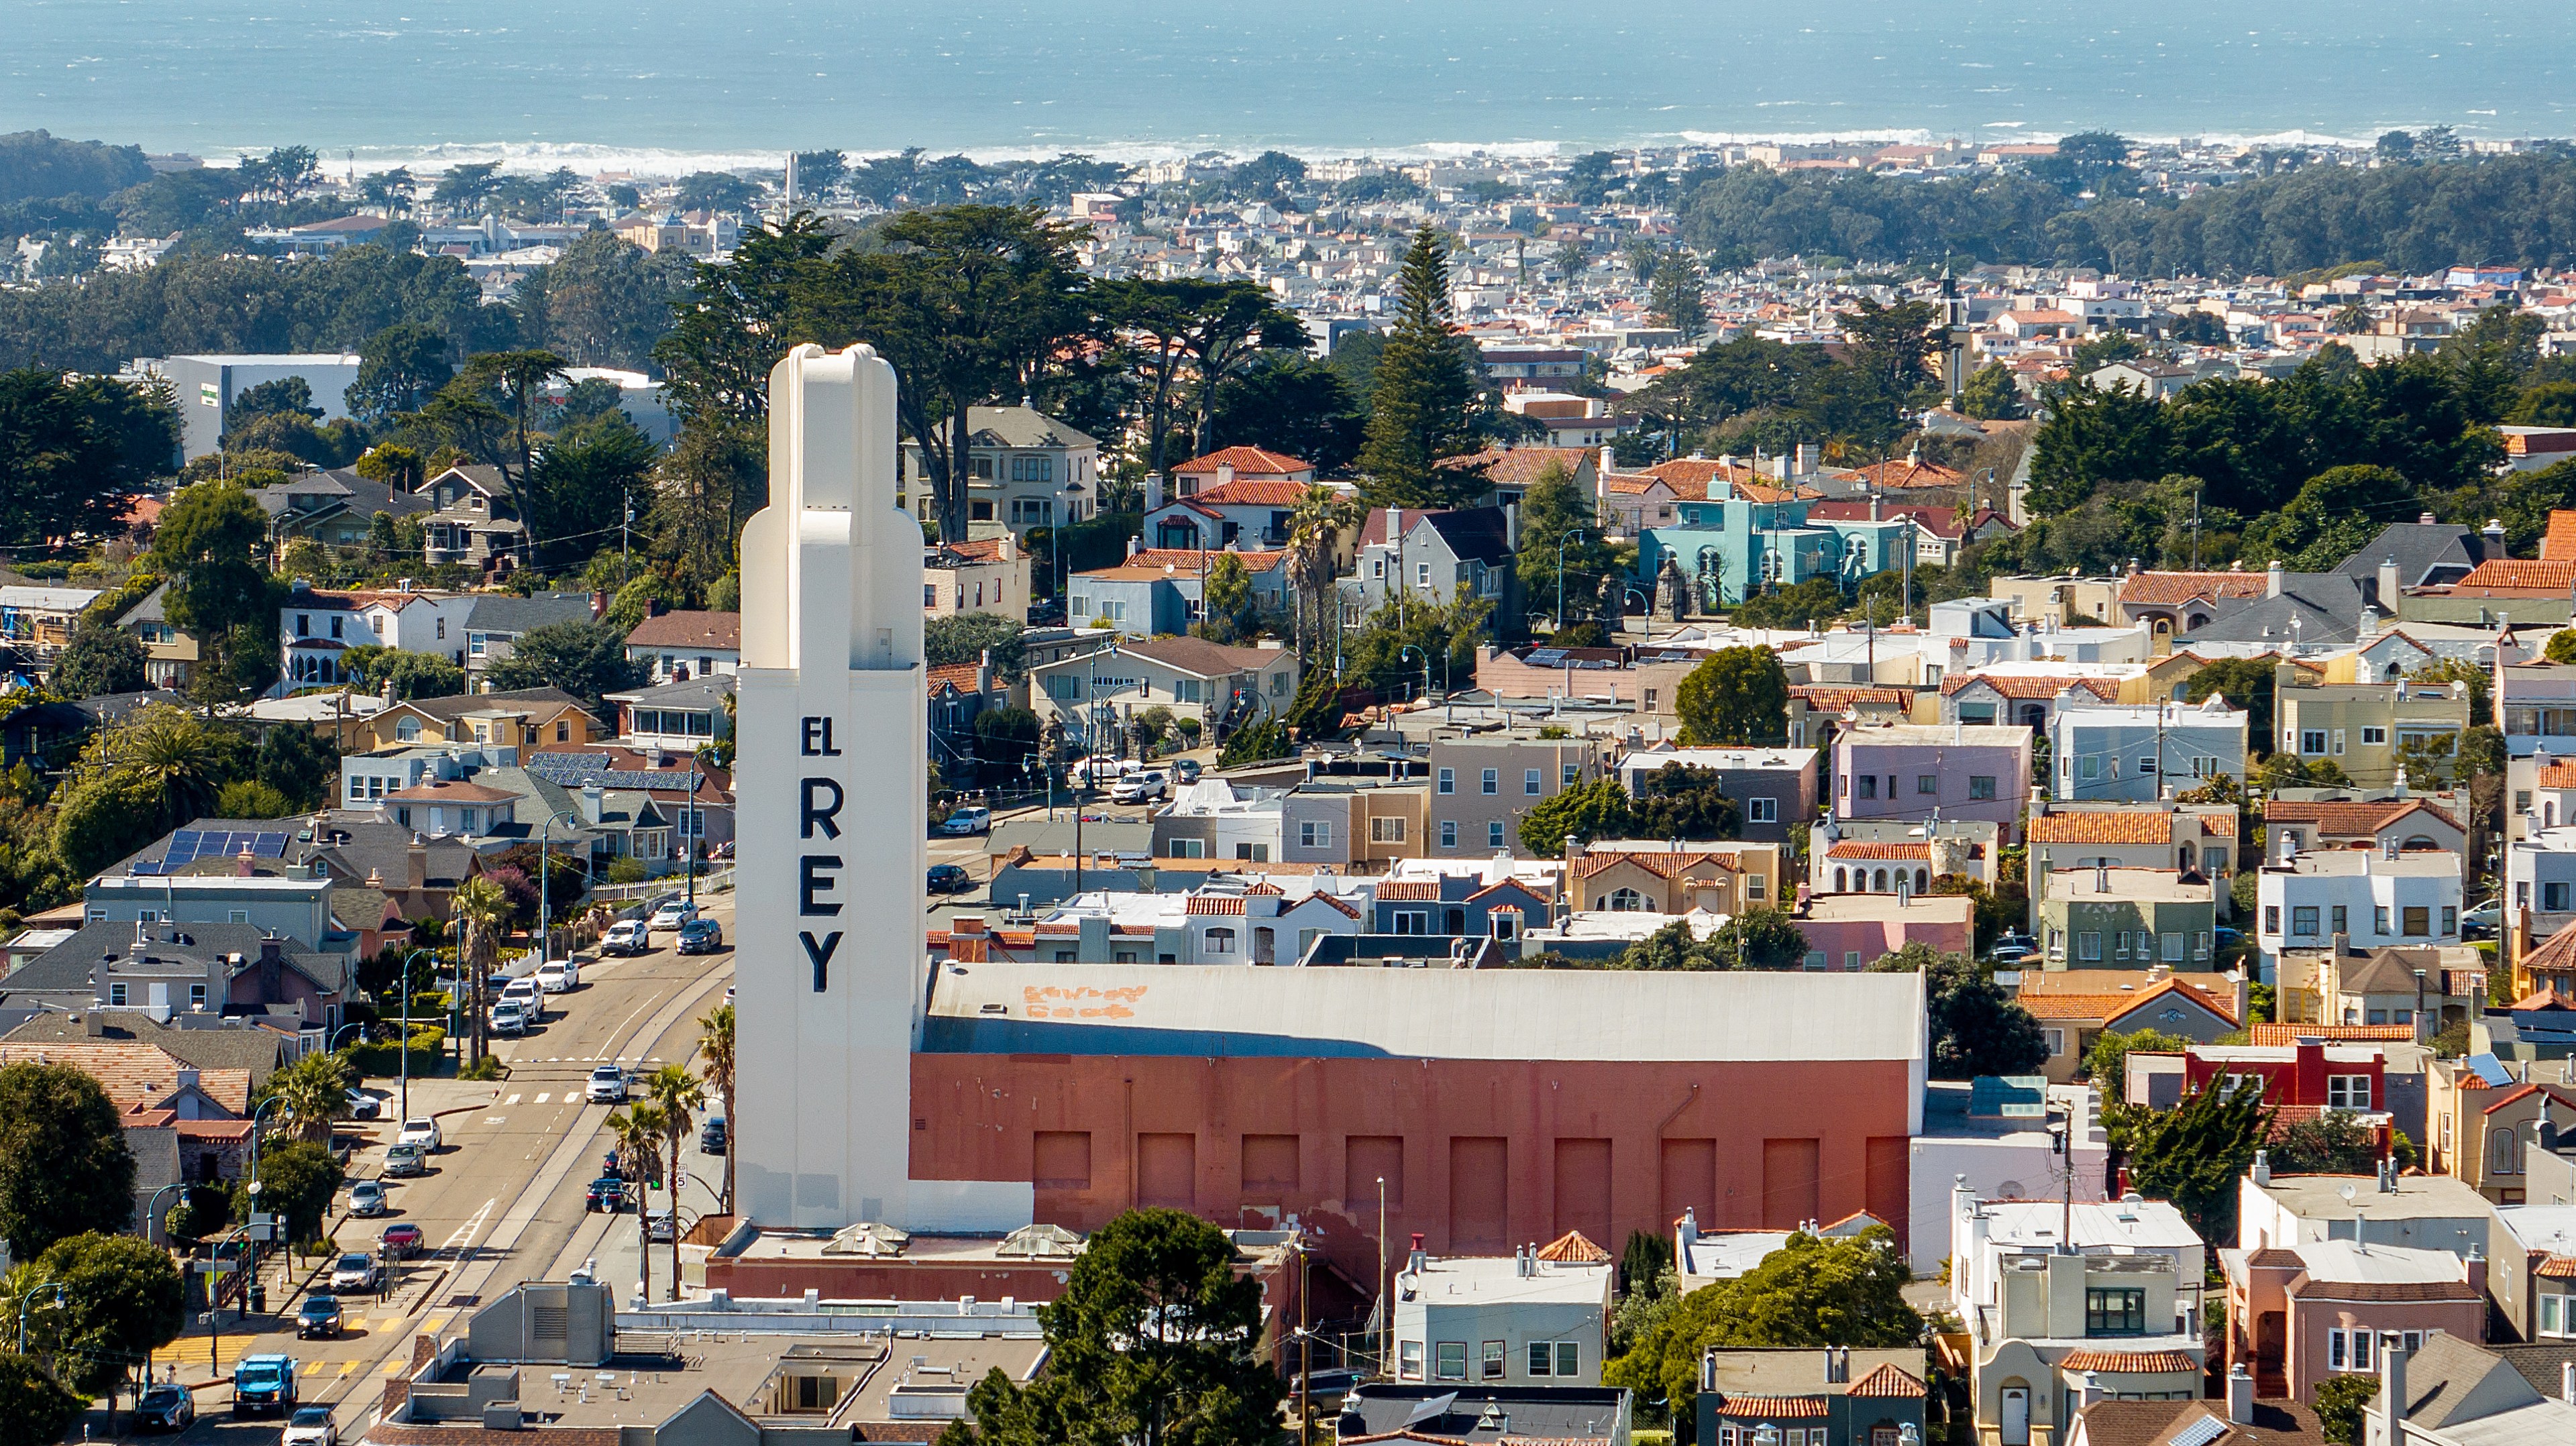 A large vertical sign reading "EL REY" atop a building, with rows of colorful houses and trees extending towards a hazy coastline in the background.